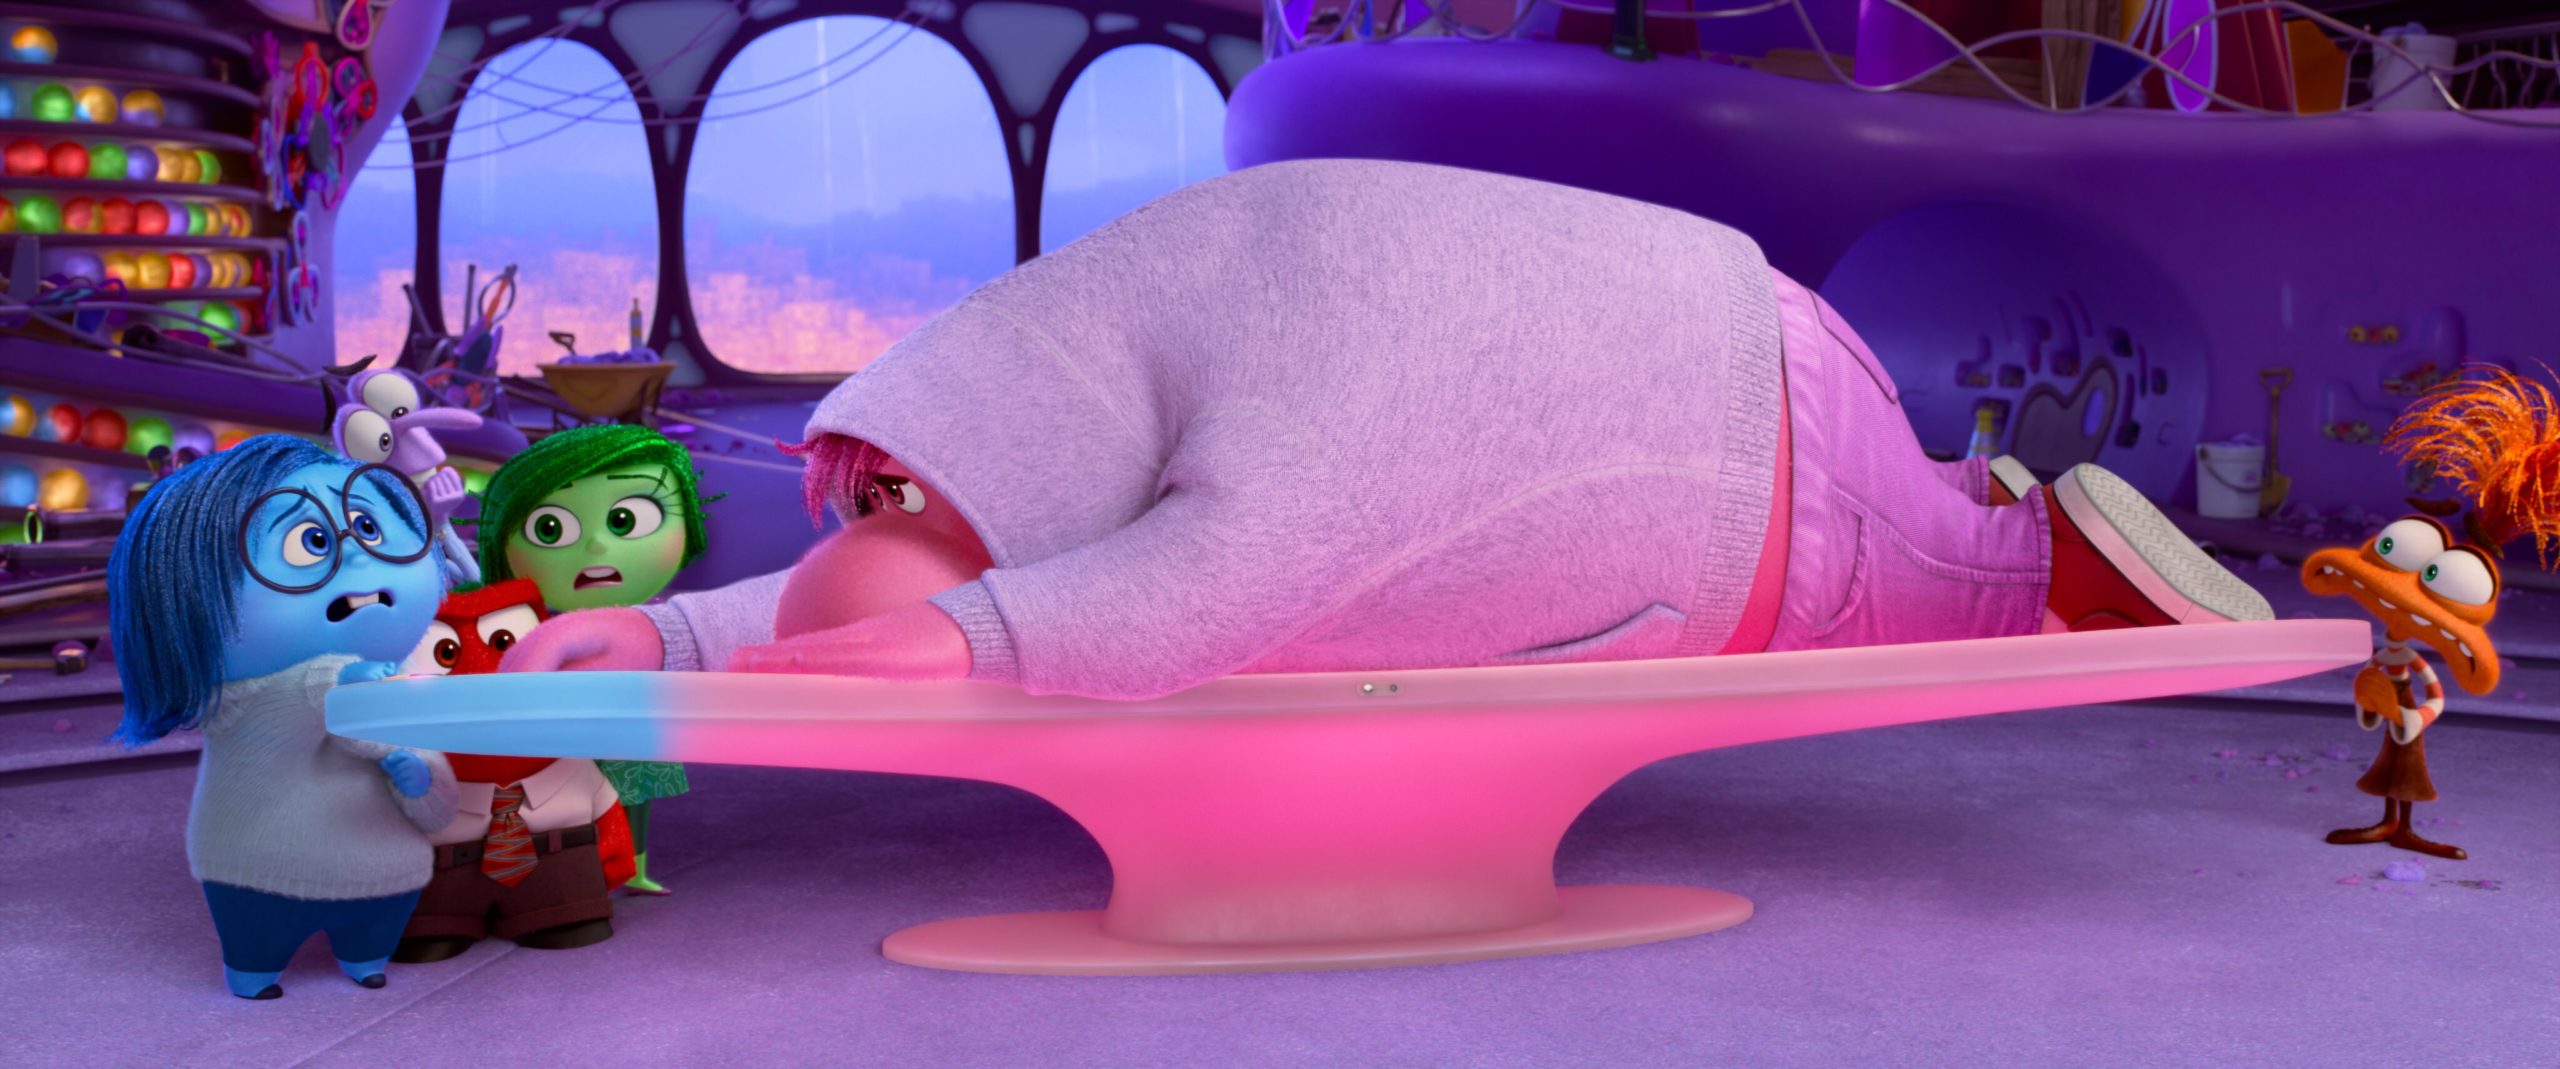 Embarrassment has had enough in Inside Out 2.